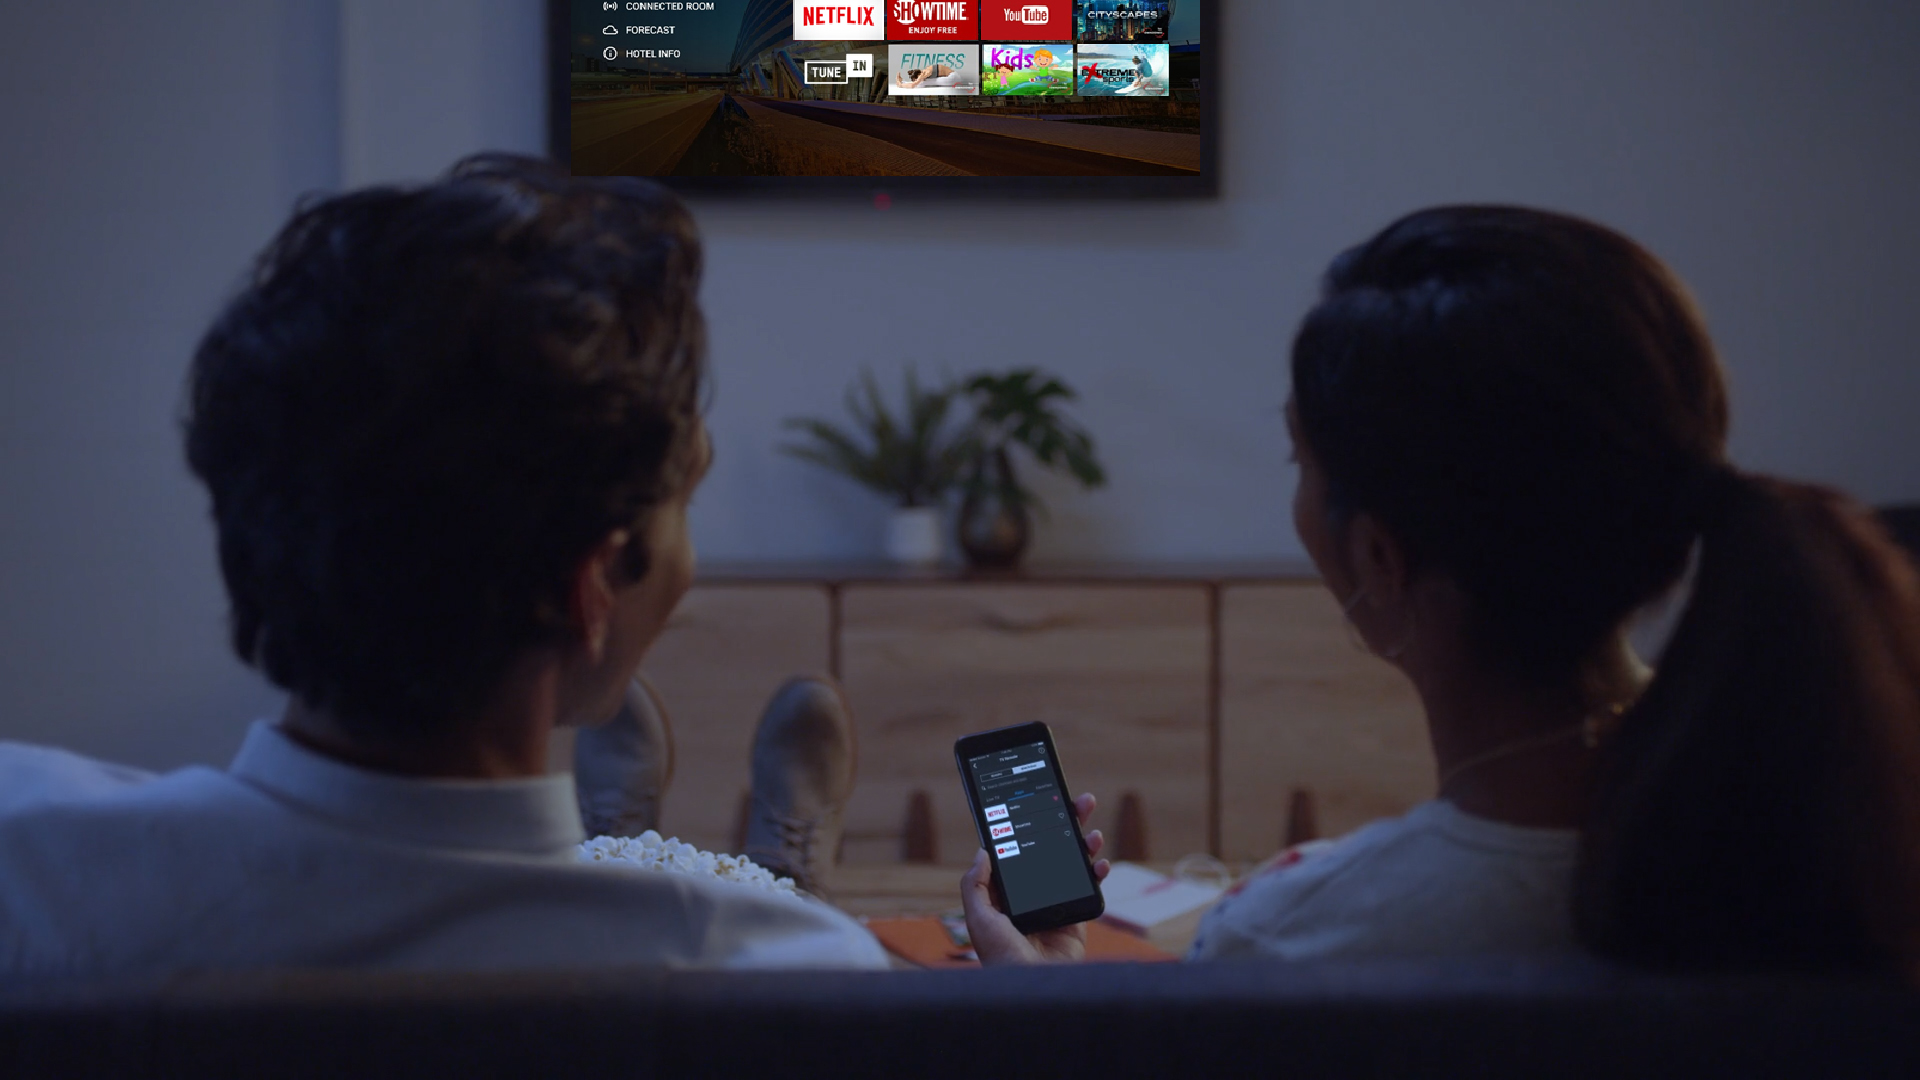 Hilton brings Netflix to its Connected Rooms